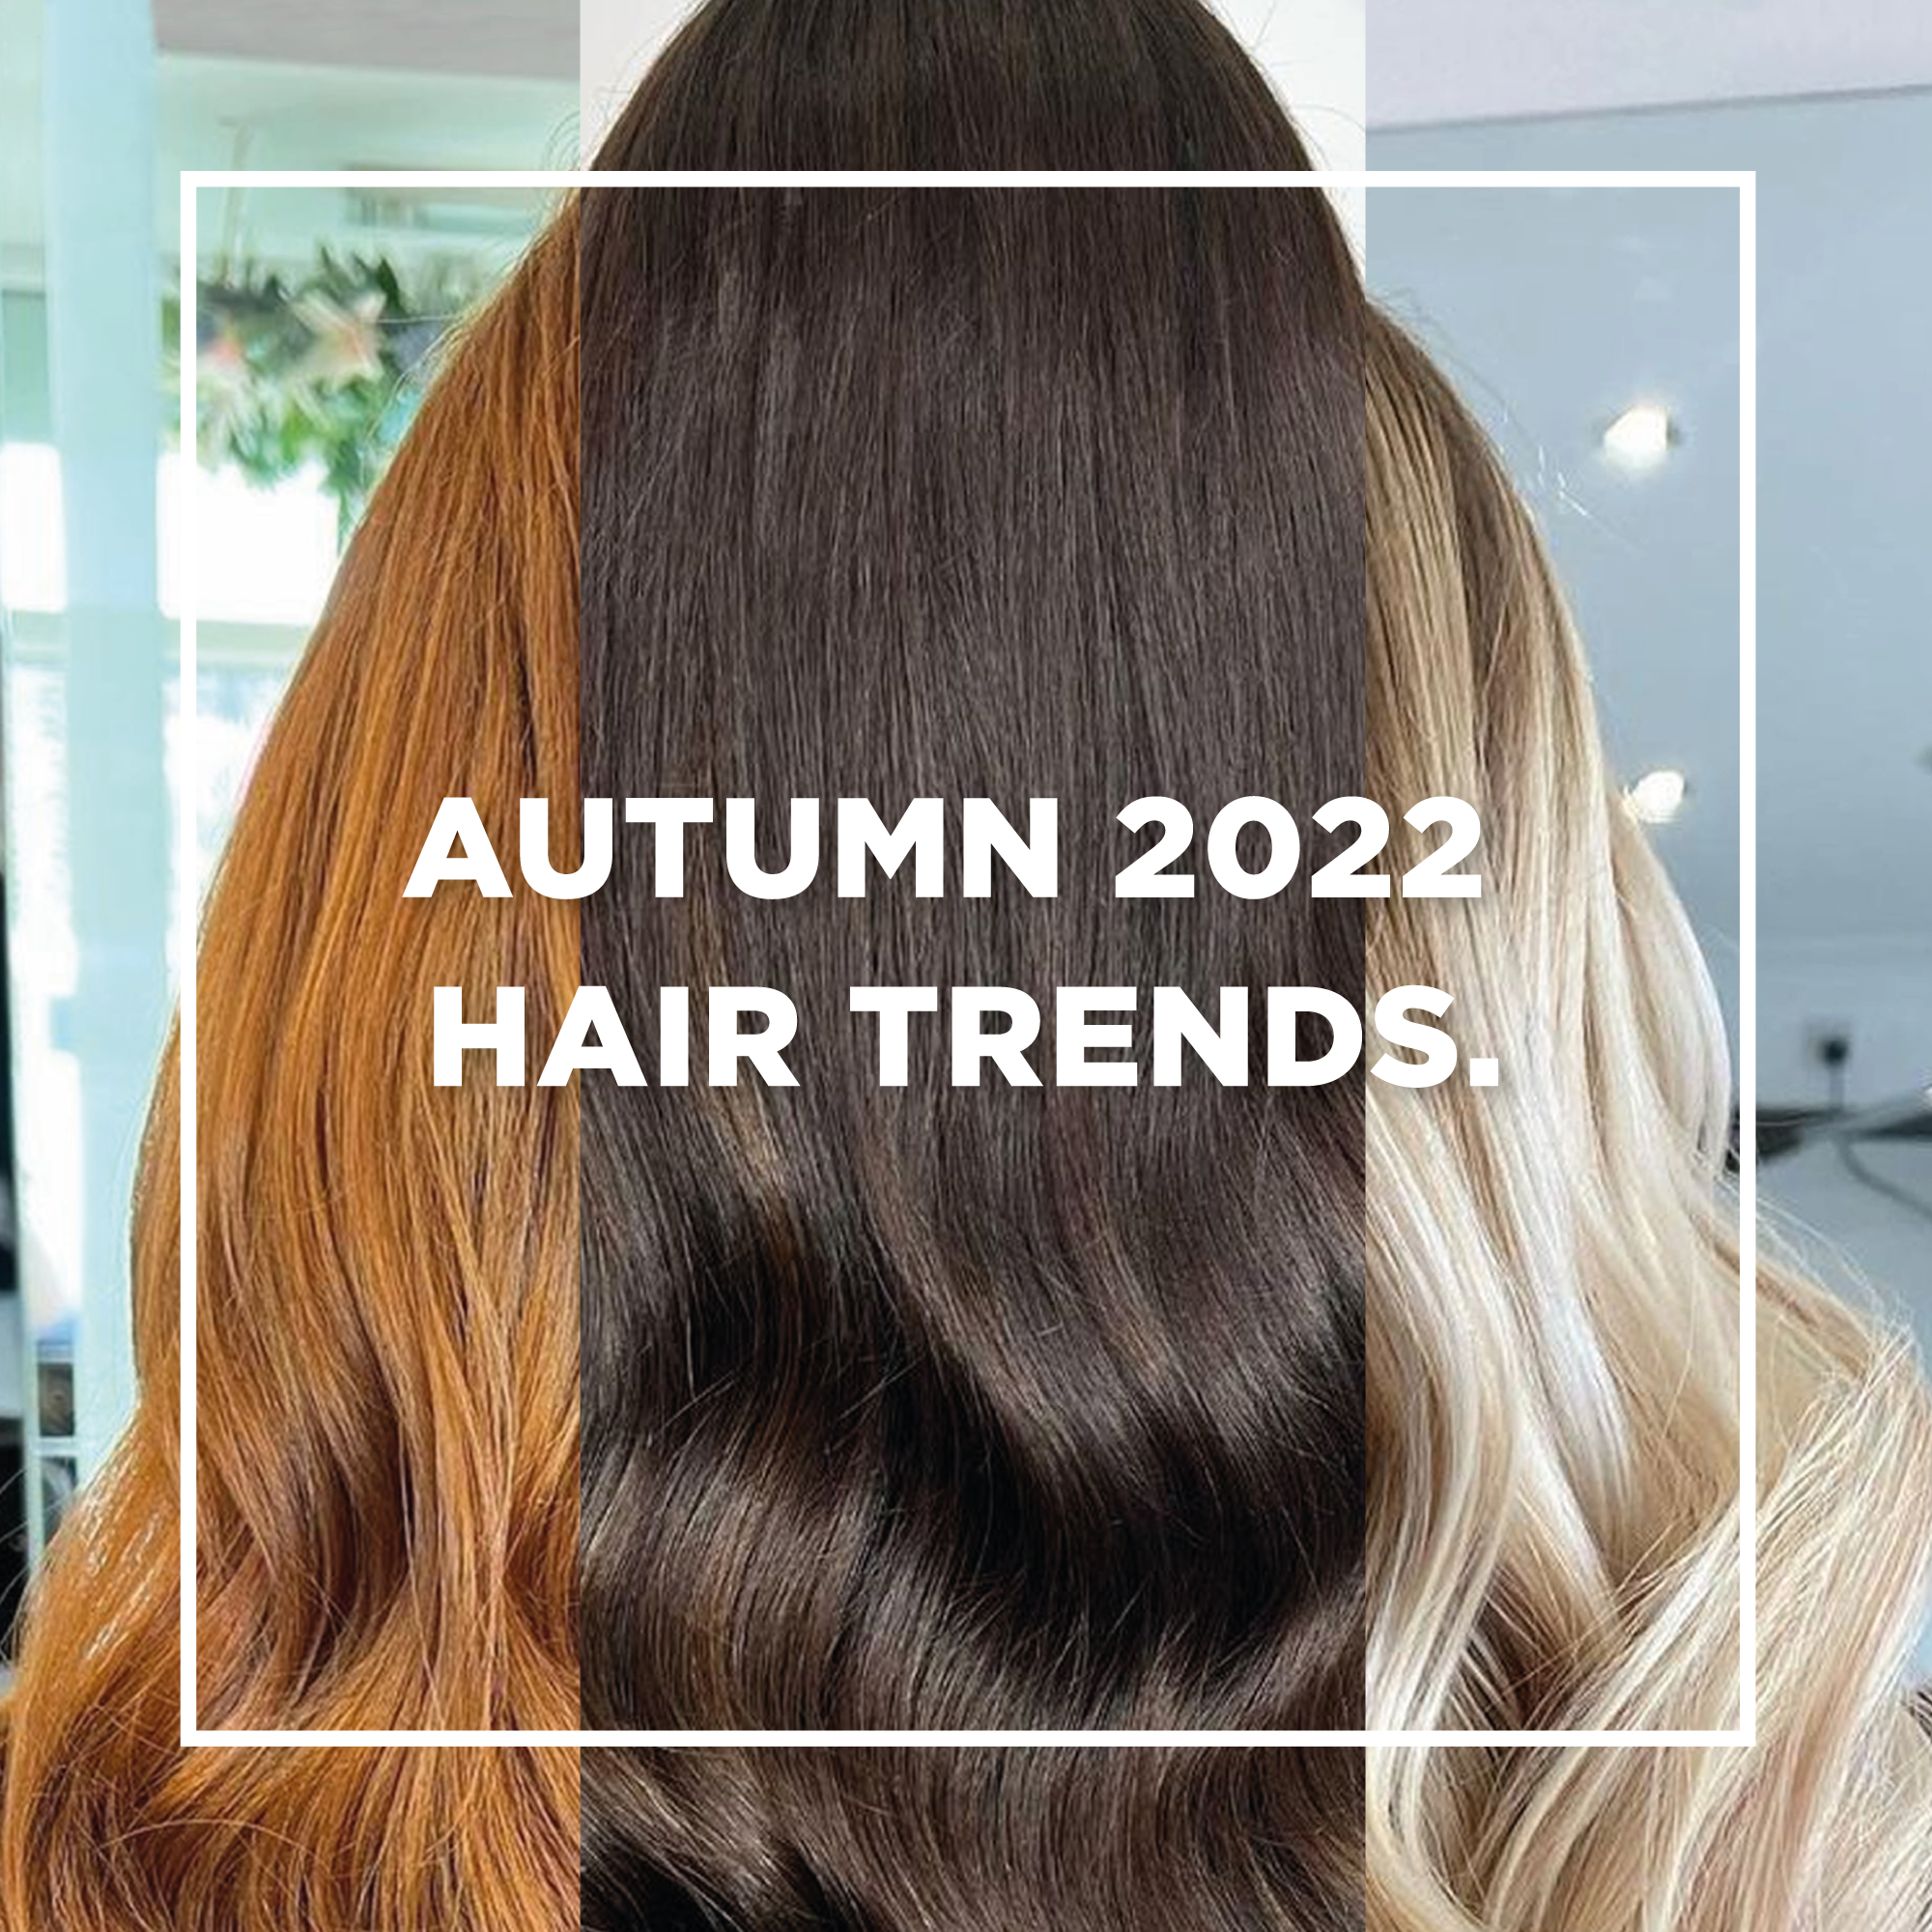 Hair Colours We Expect To Trend In Autumn 2022